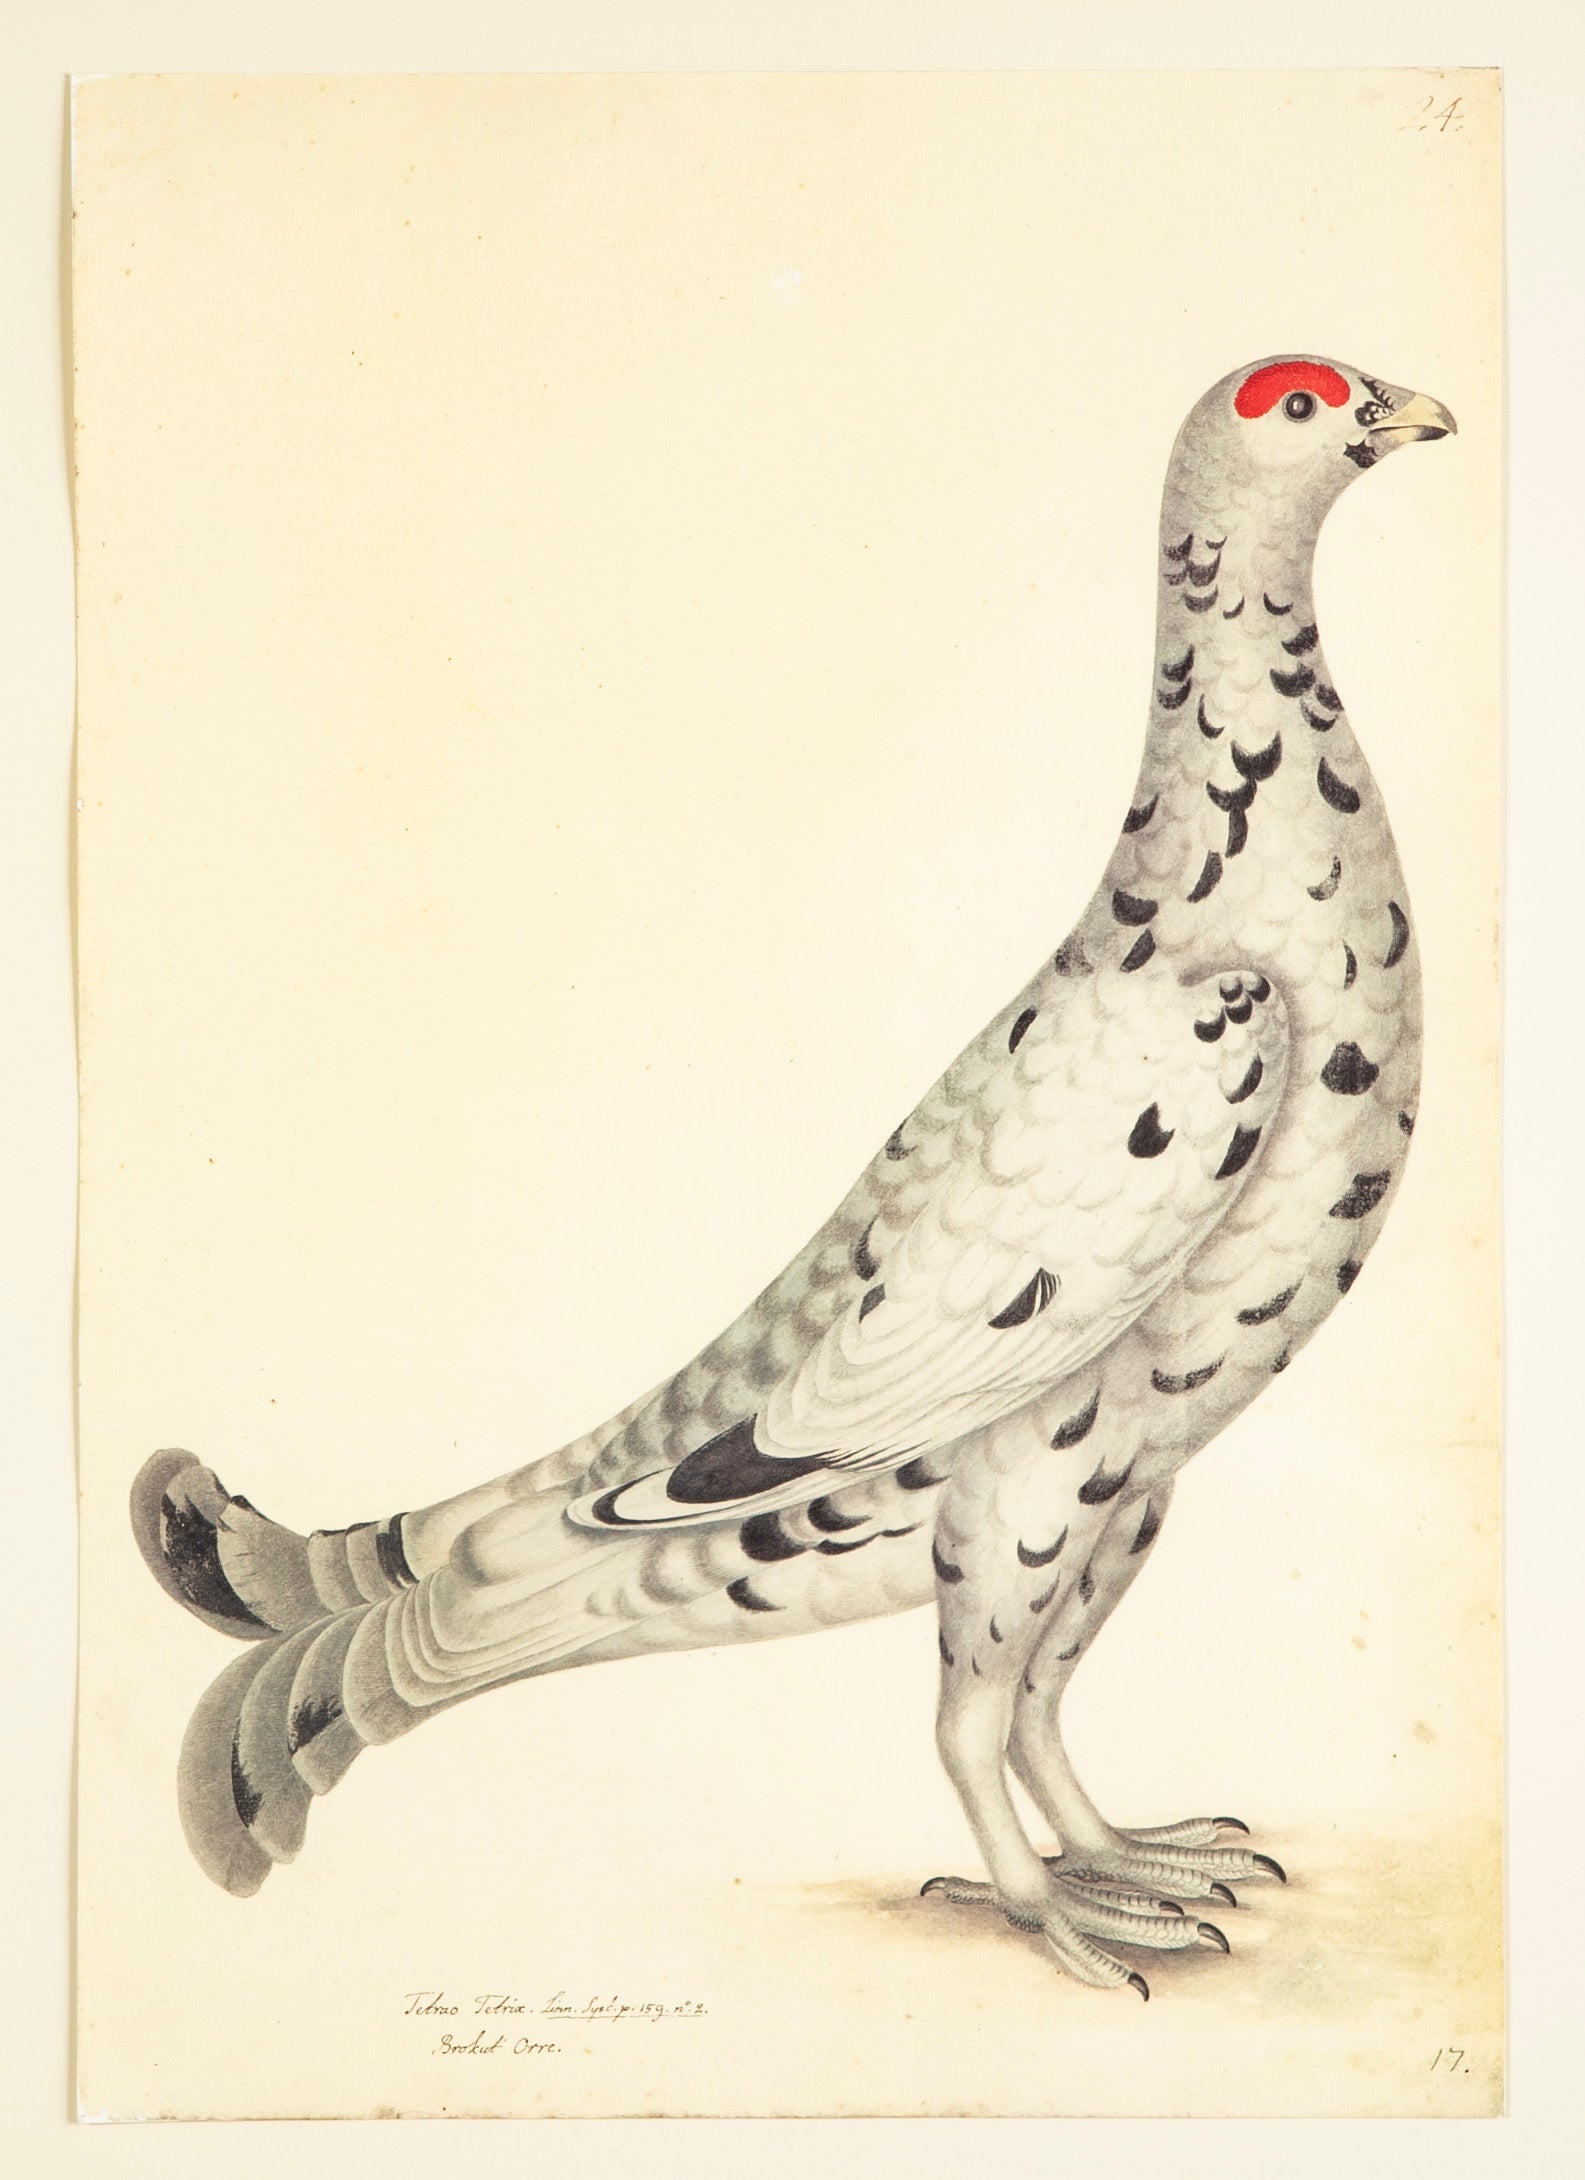 Offset Lithograph of "Black Grouse Leucistic Form, PL 17" from the "The  Great Bird Book" by Olof Rudbeck The Younger